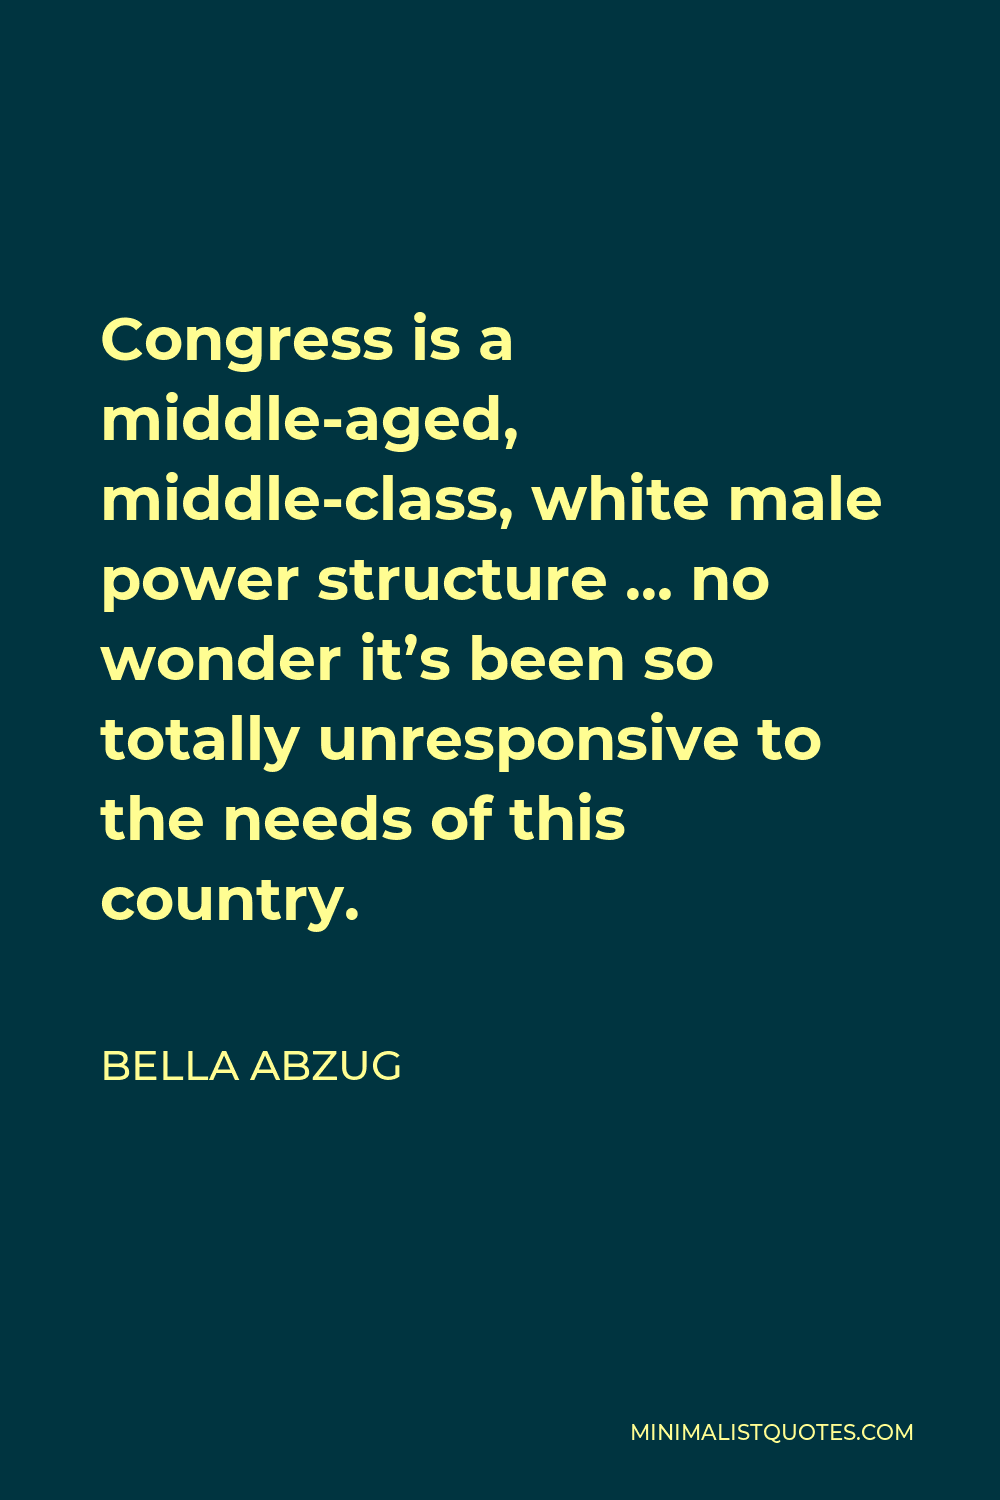 Bella Abzug Quote - Congress is a middle-aged, middle-class, white male power structure … no wonder it’s been so totally unresponsive to the needs of this country.